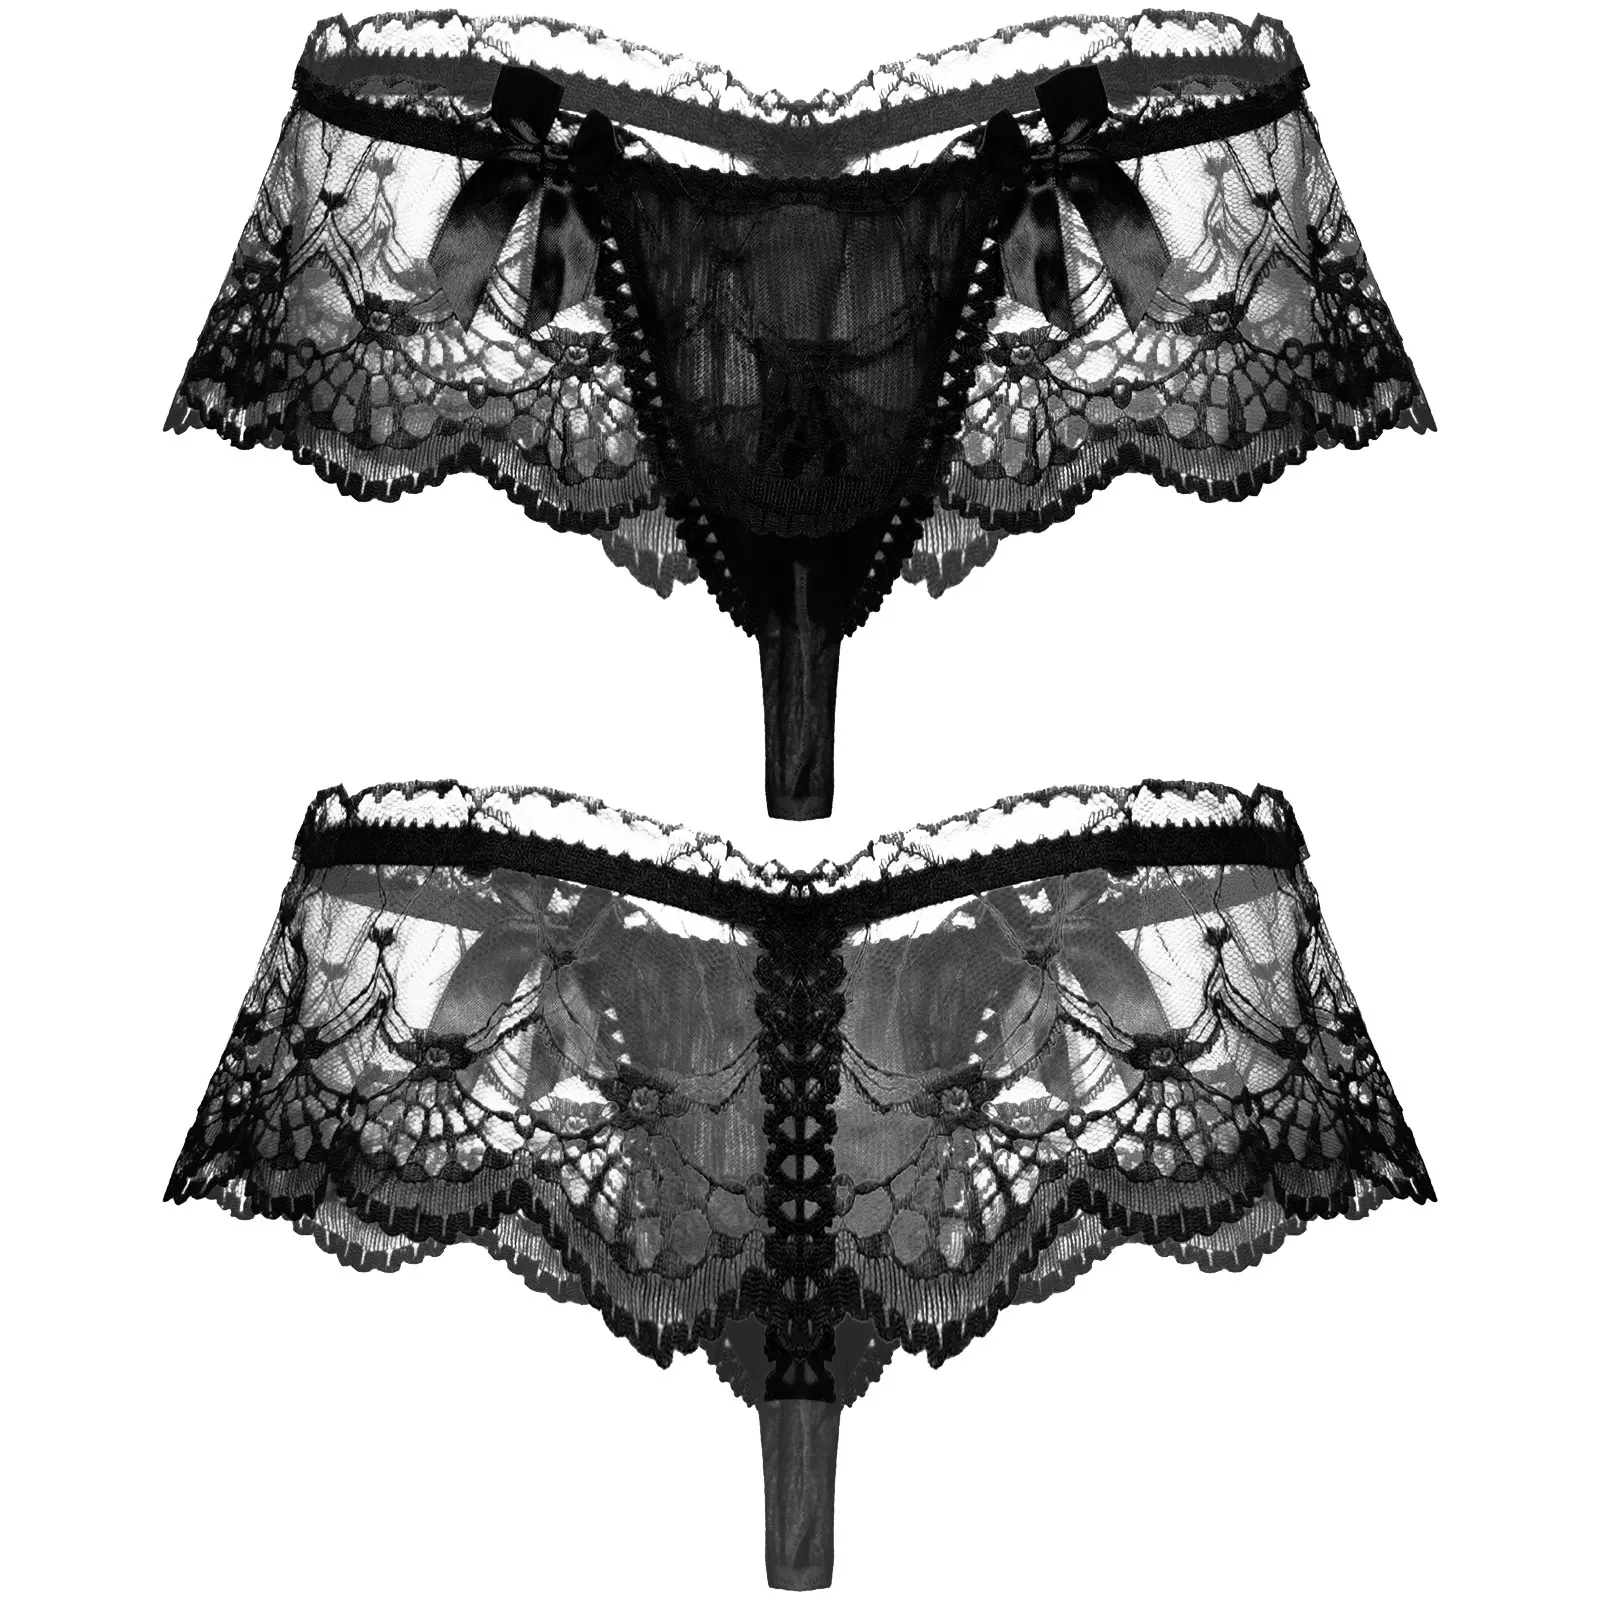 

Sissy Panties Men's Underpant Sexy Lace Briefs See-though Underwear Lingerie Nightwear Open Bulge Pouch Thongs Gay Underpants